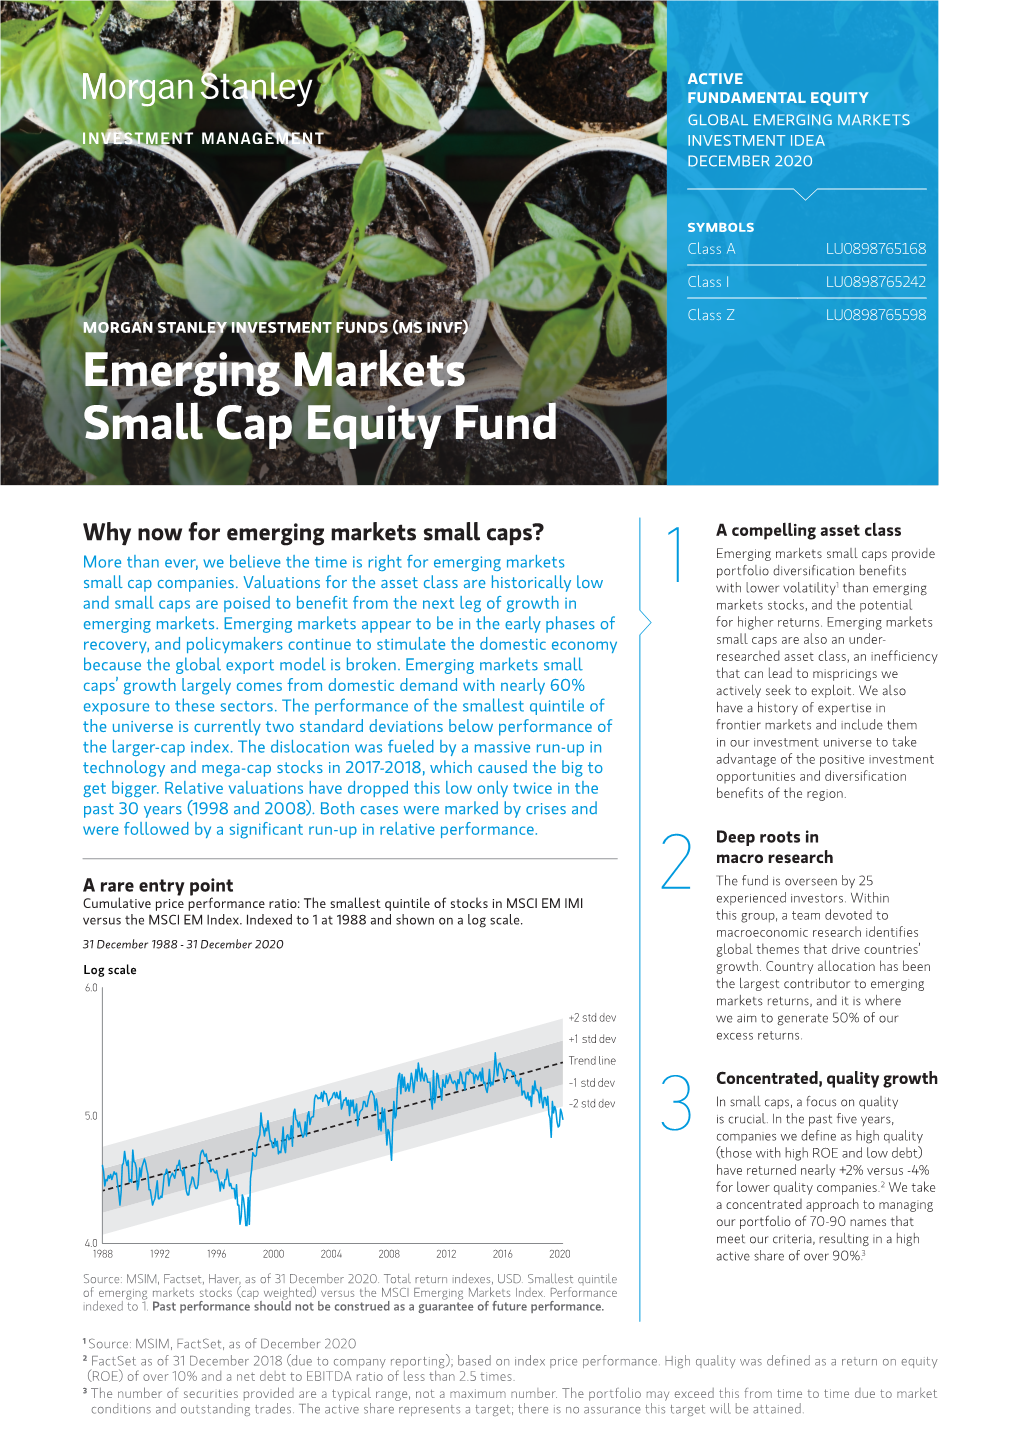 Emerging Markets Small Cap Equity Fund